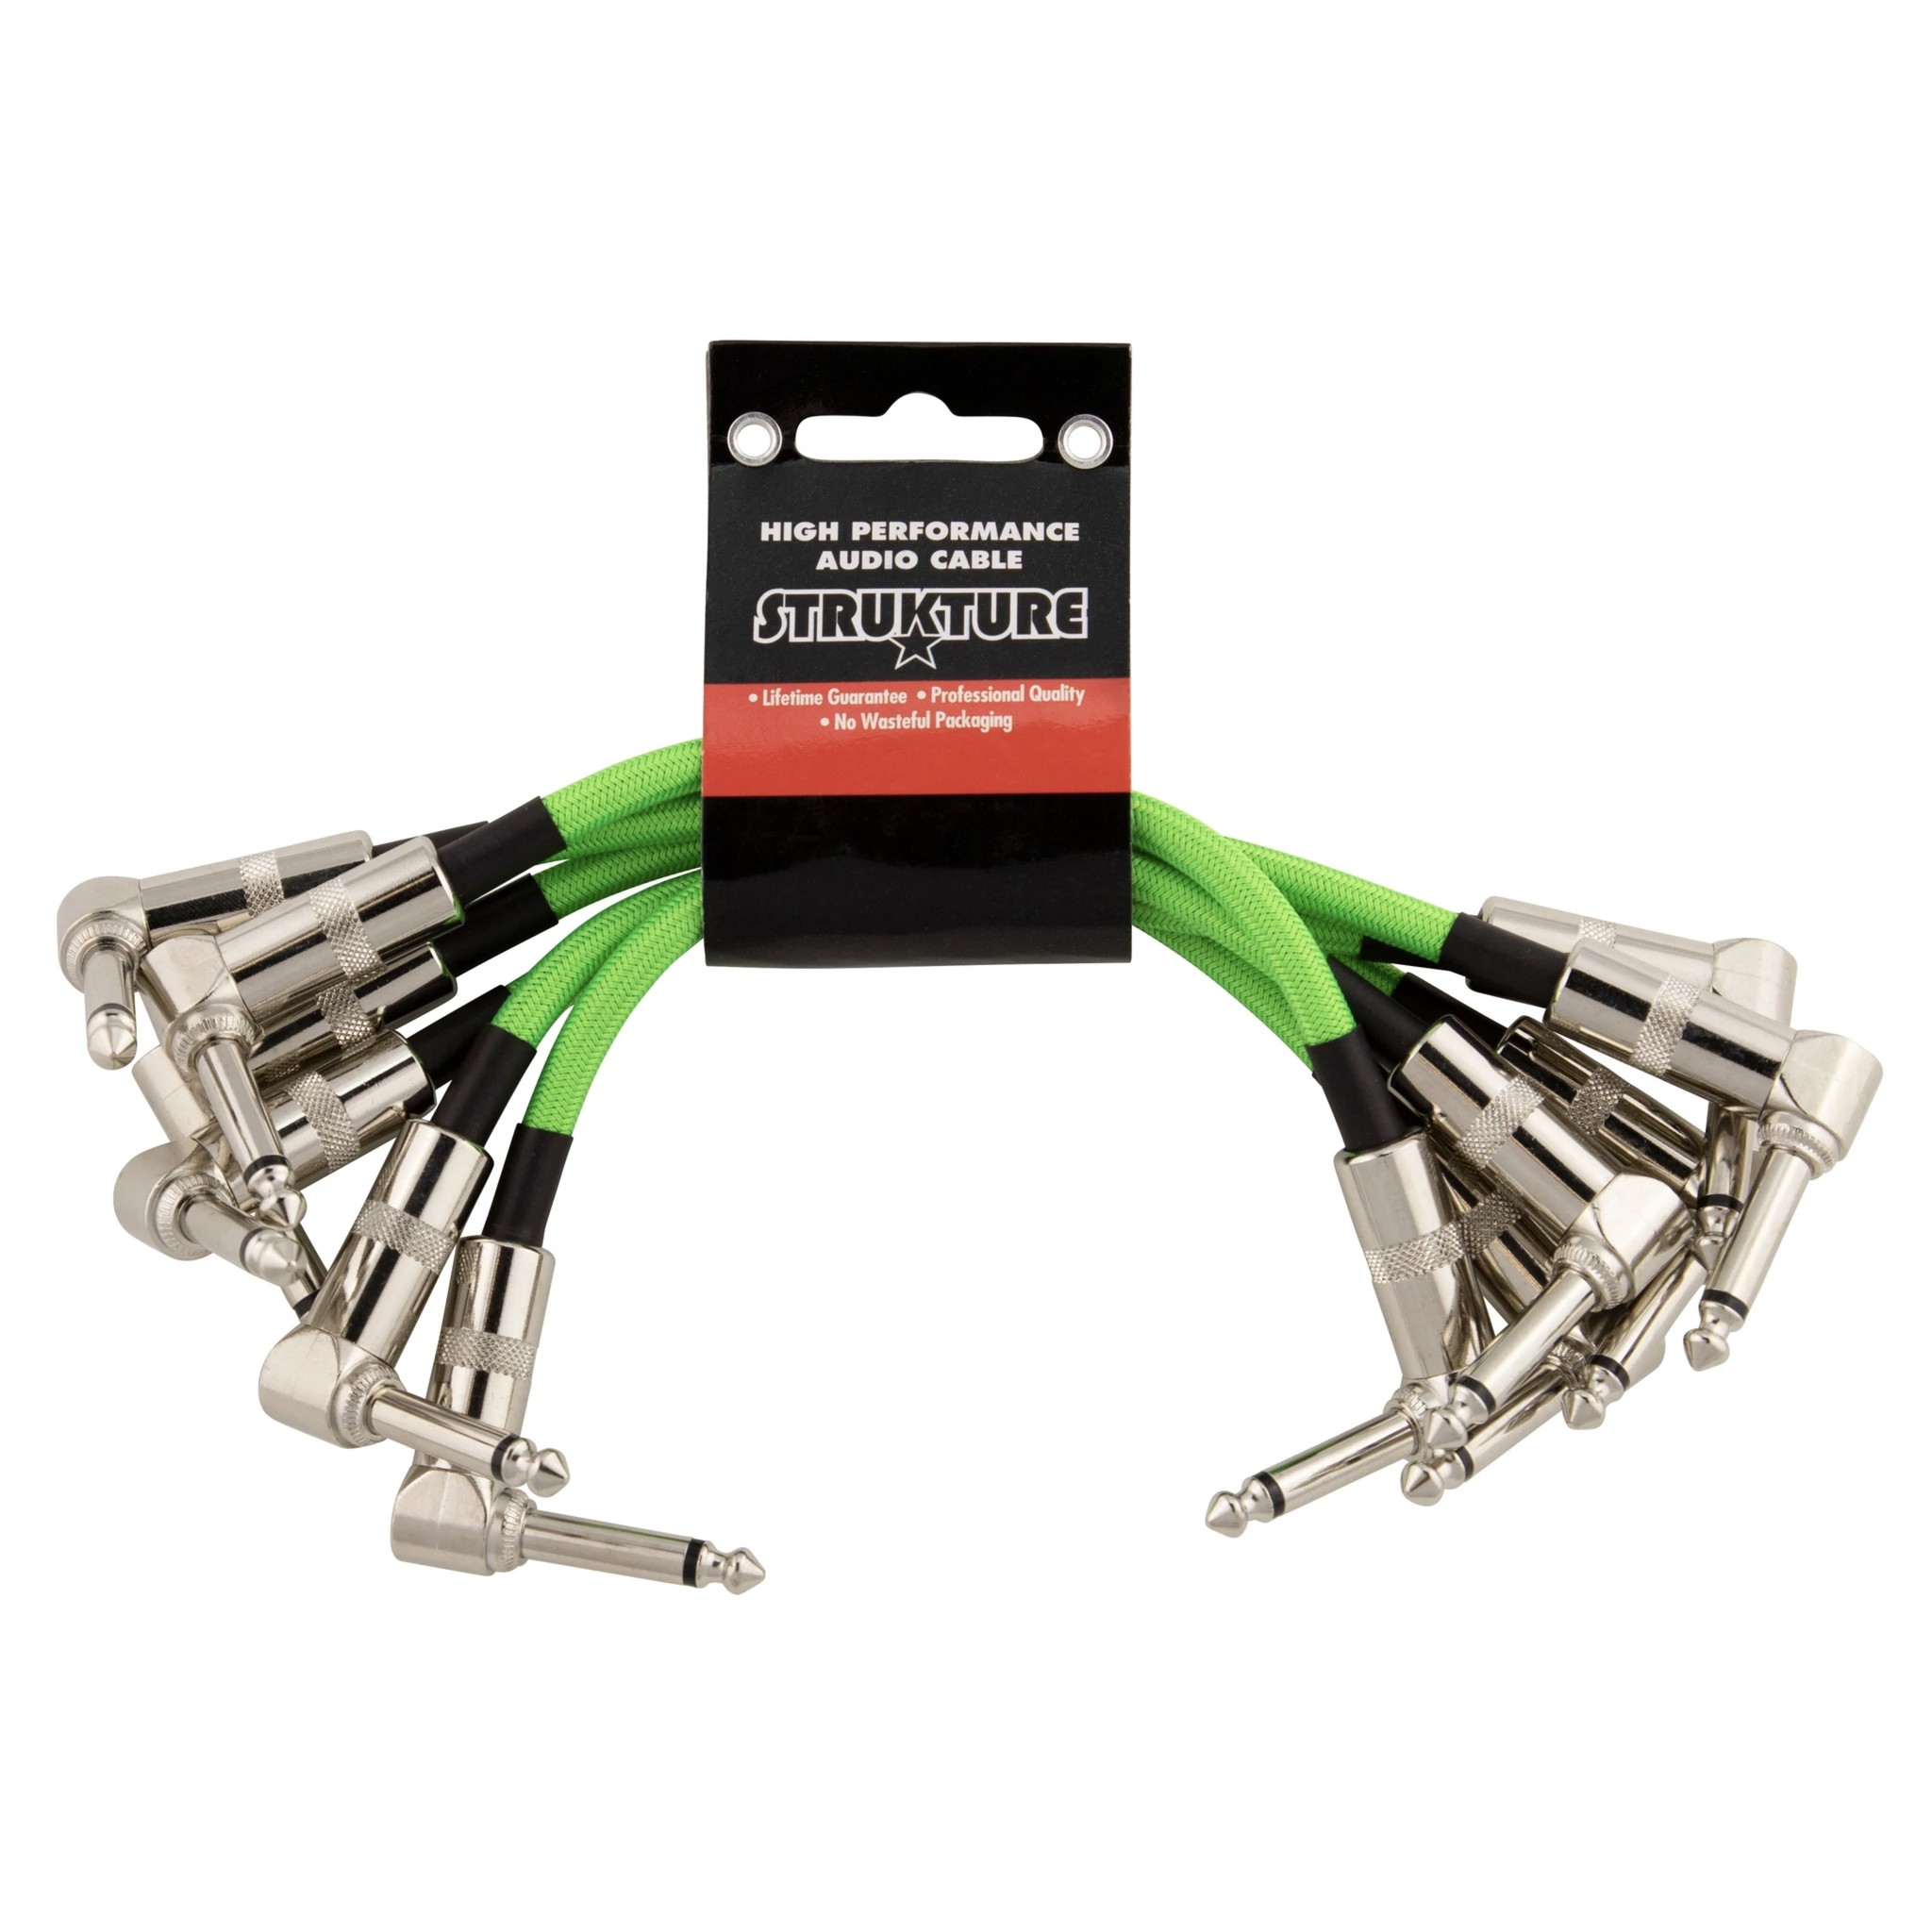 Strukture 6-Inch Patch Cable 6-Pack, Neon Green